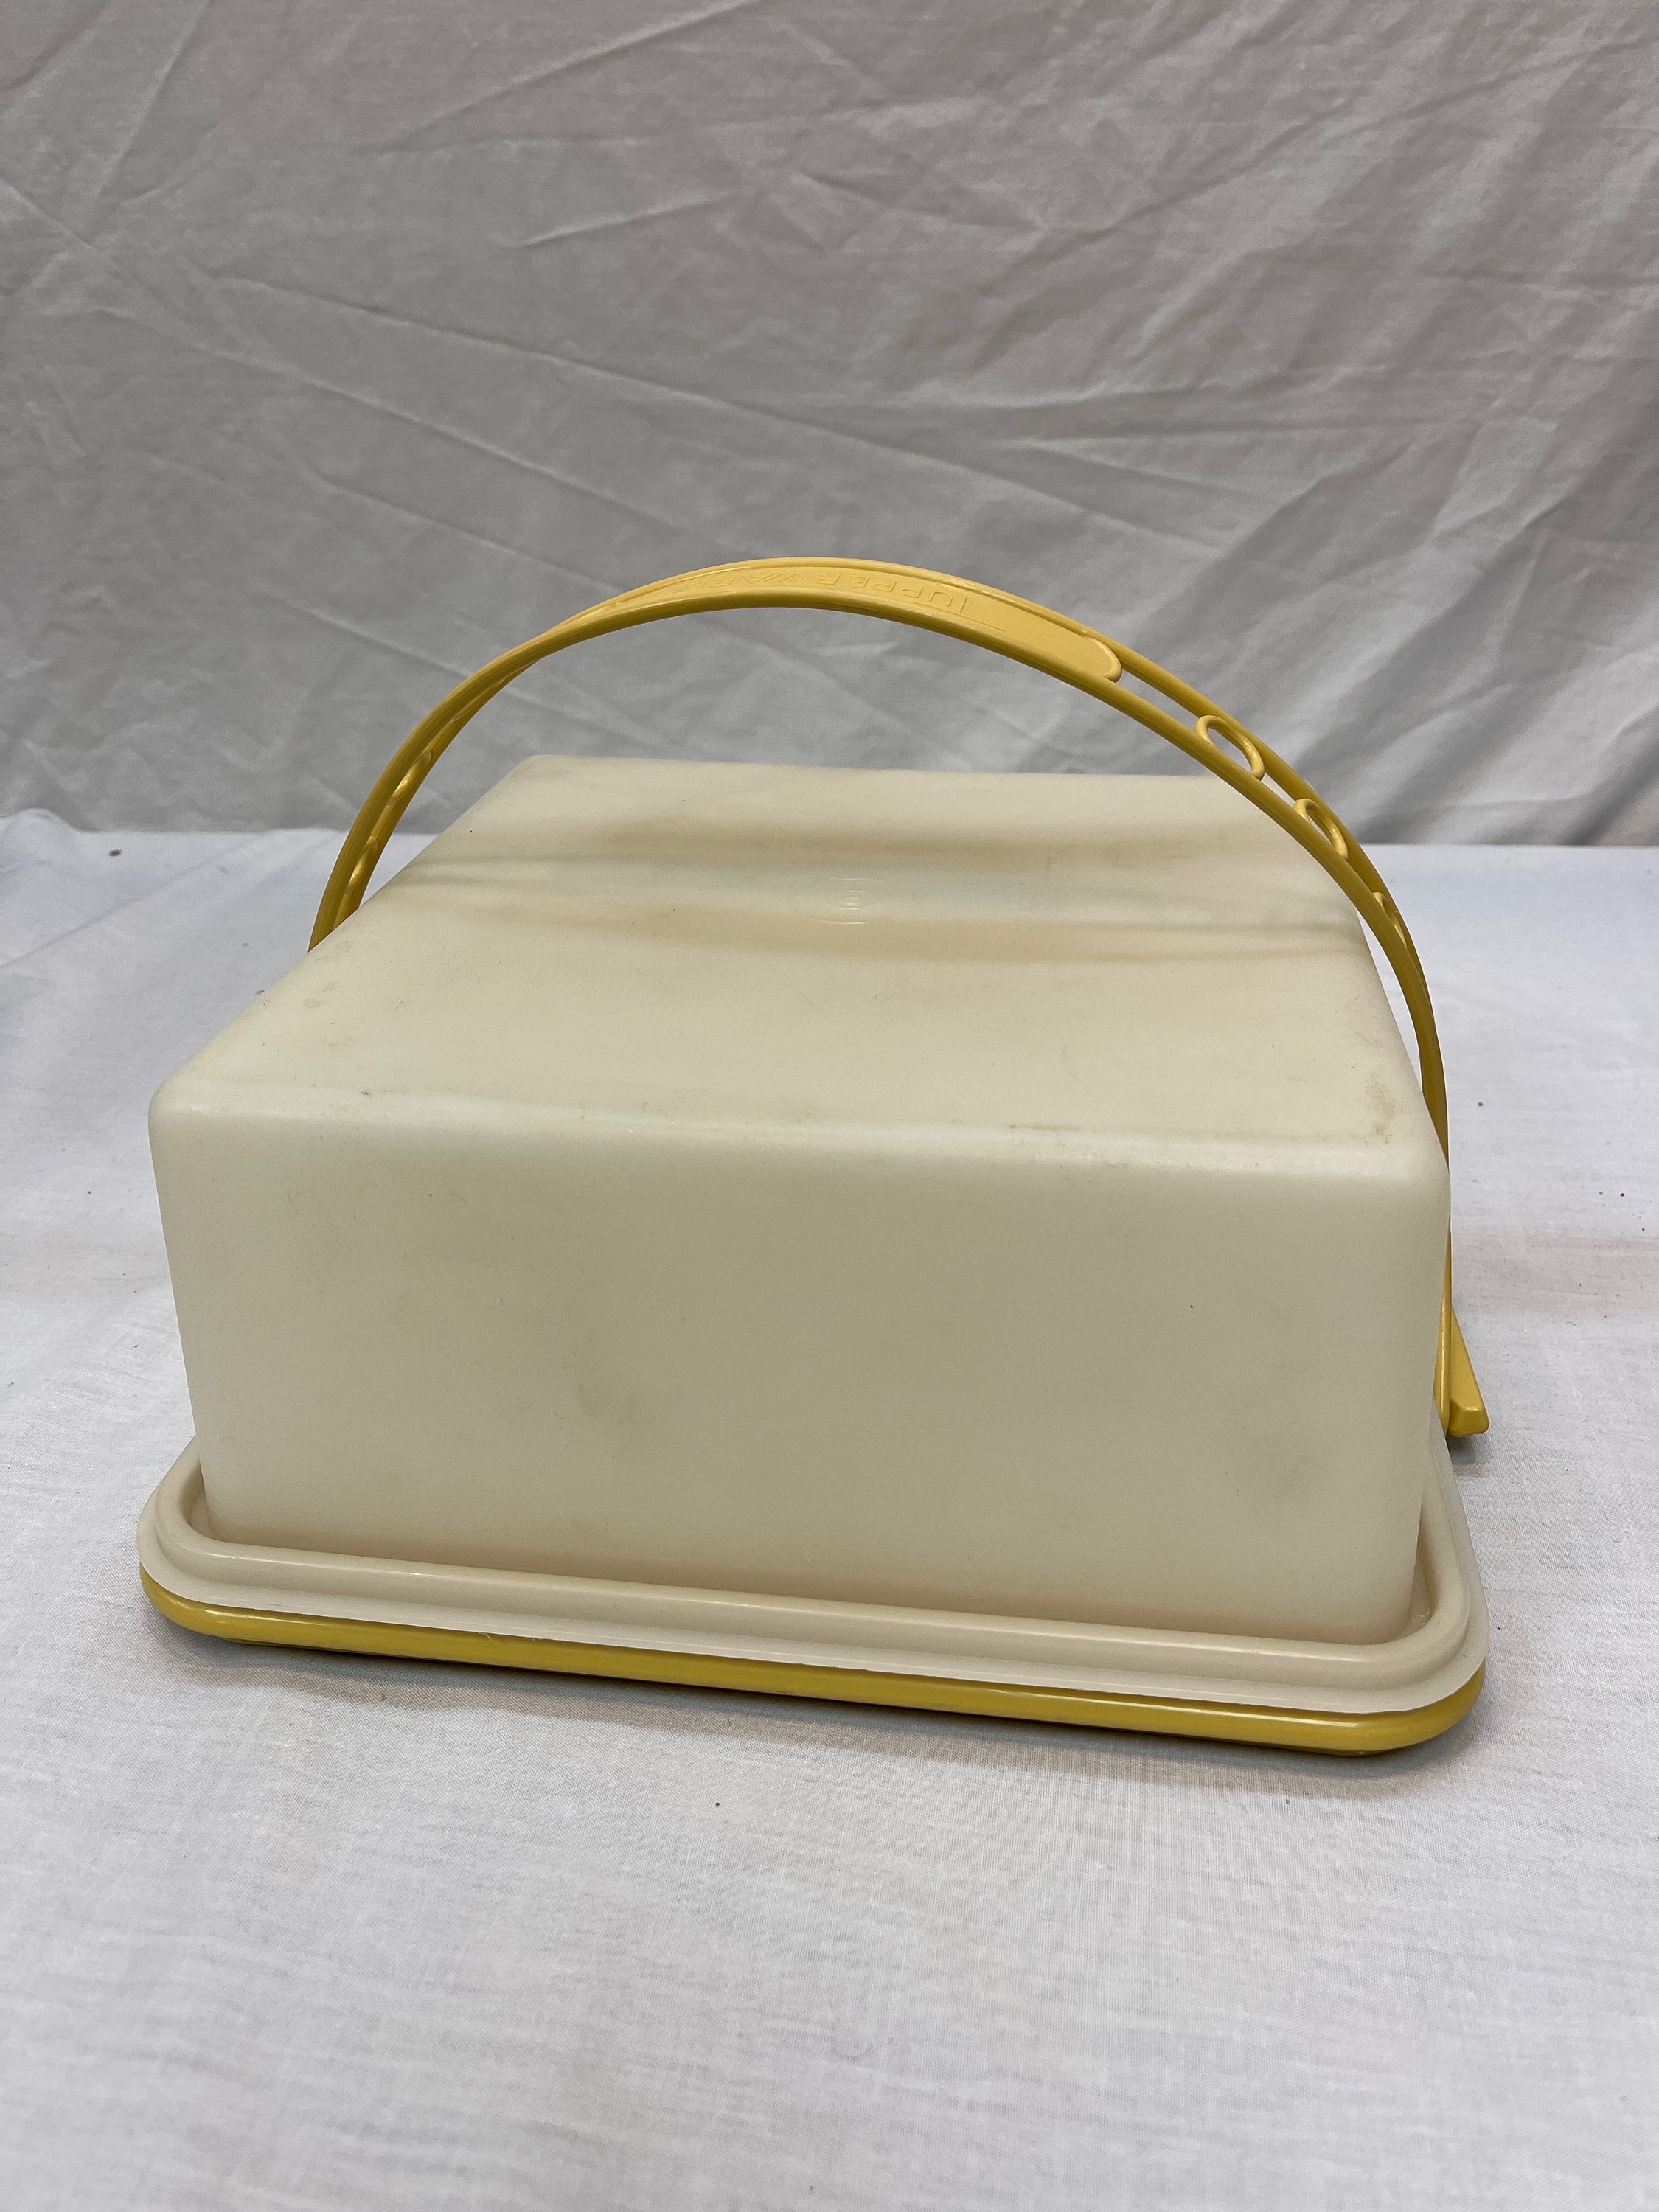 Vintage 2 Piece Rectangle Cake Carrier Keeper in Great 